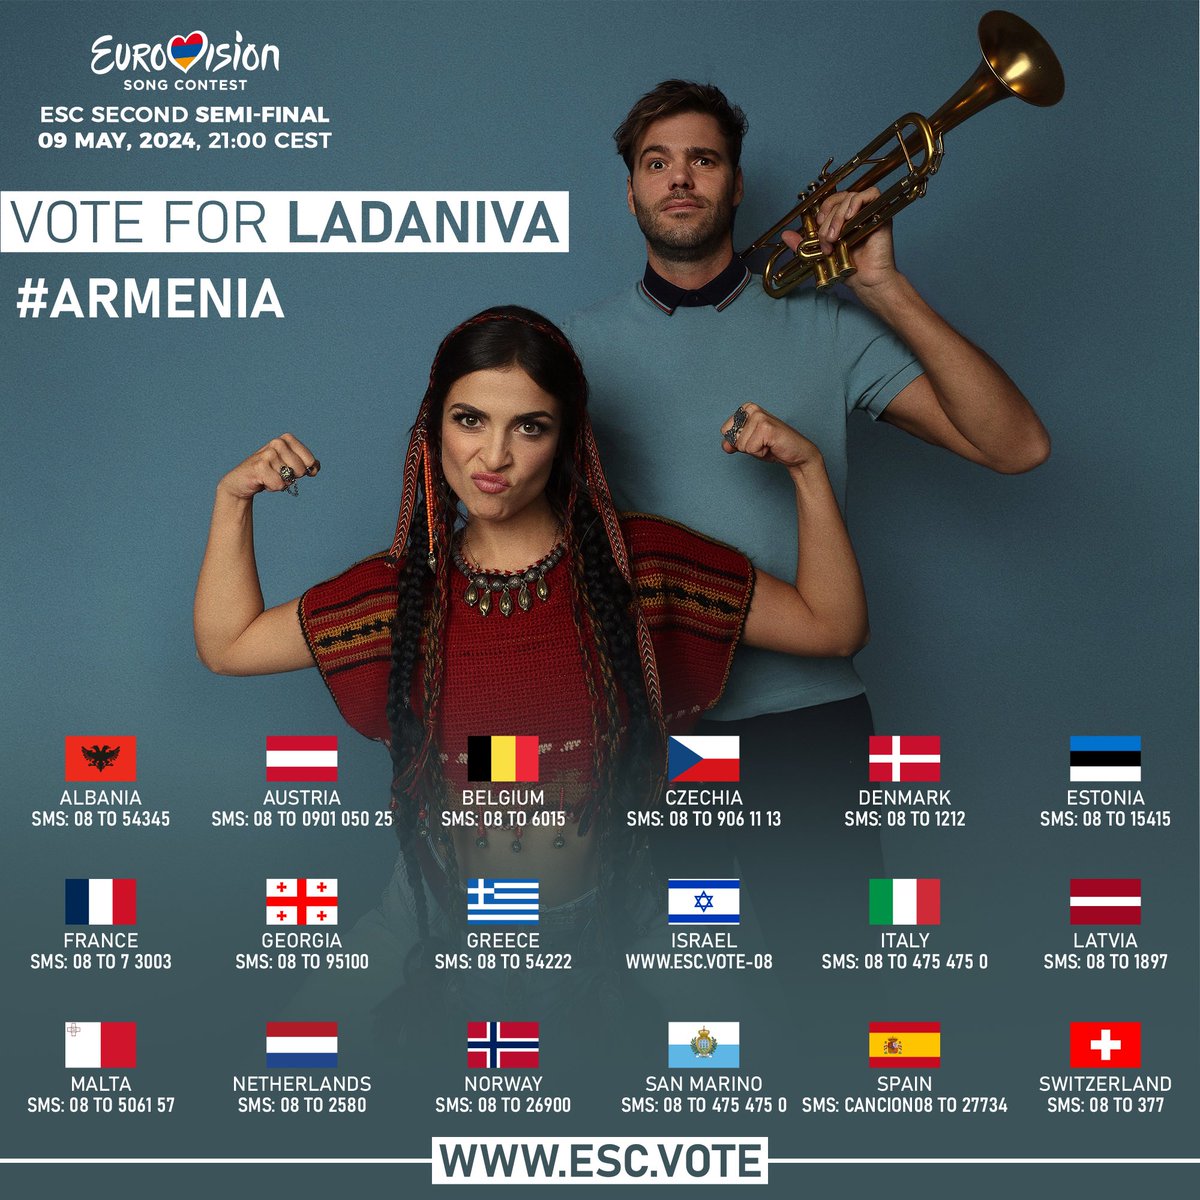 📲 Here’s the list of all the countries that can vote for LADANIVA in the 2nd semi final of Eurovision! LADANIVA’s performance number is 08. You can vote using the official Eurovision Song Contest app, or by telephone and/or SMS. 📺 Watch the 2nd Semi-final LIVE on Thursday.